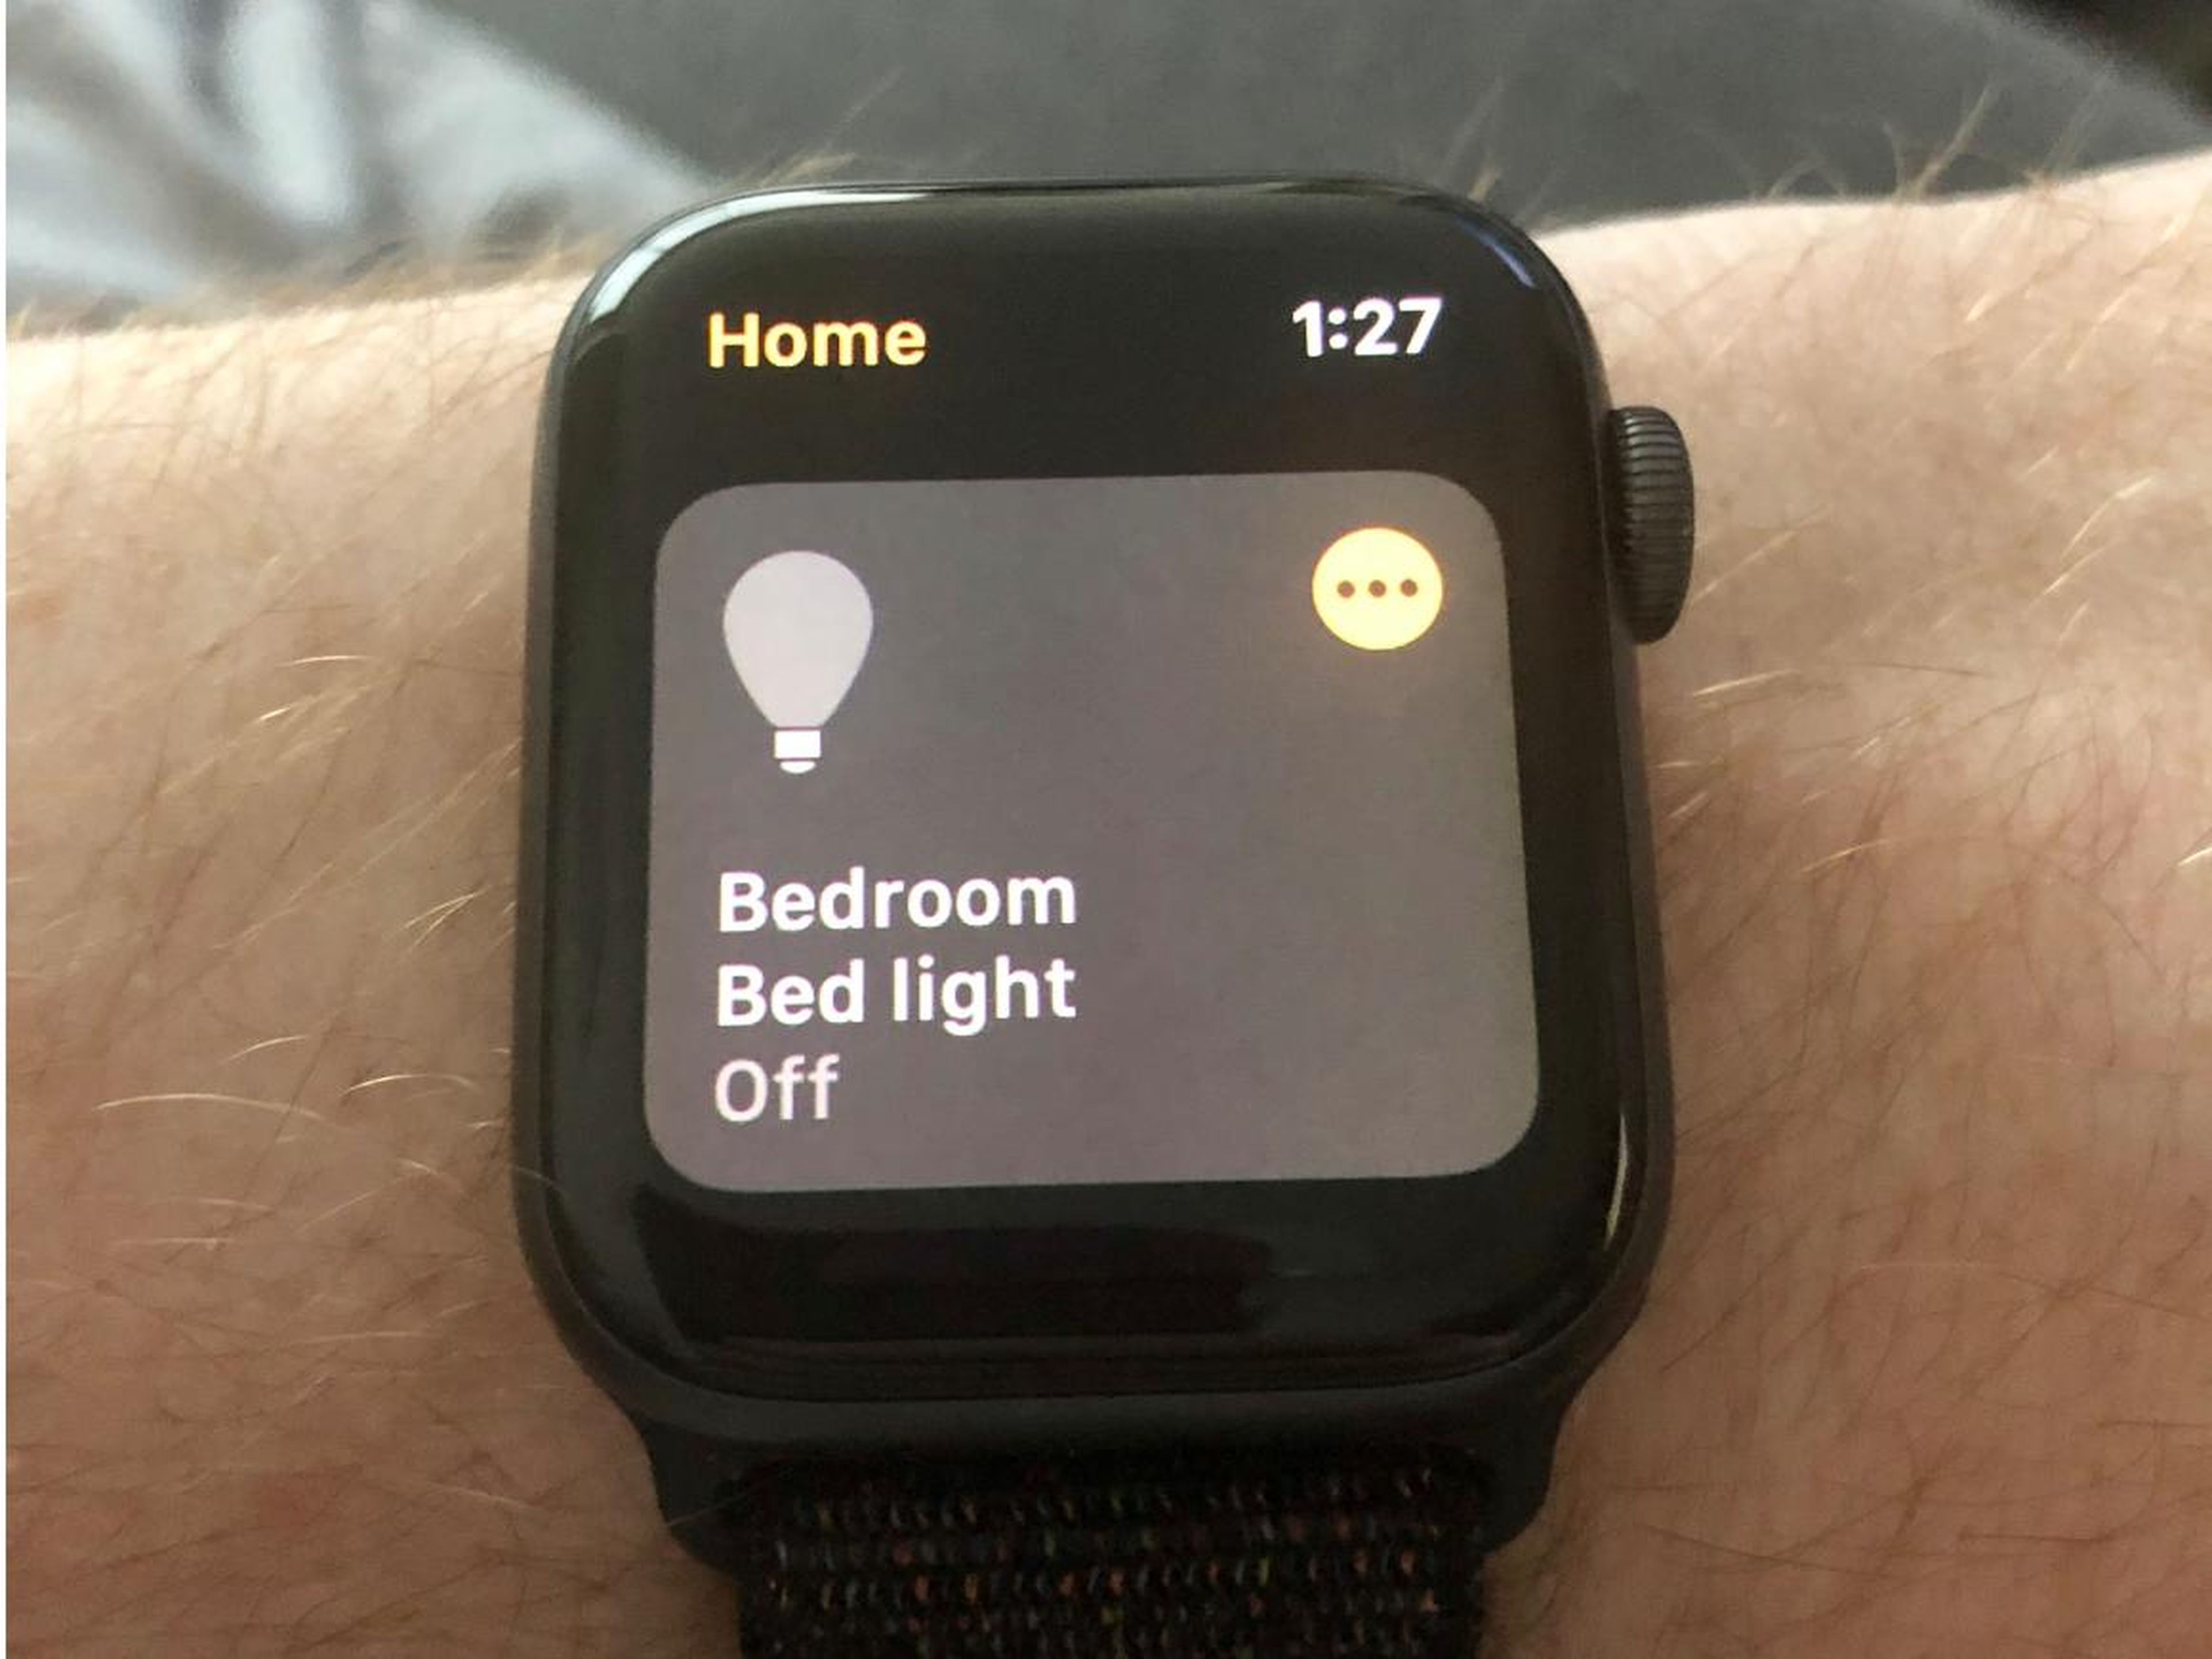 19. Your Apple Watch can control your smart-home lights.